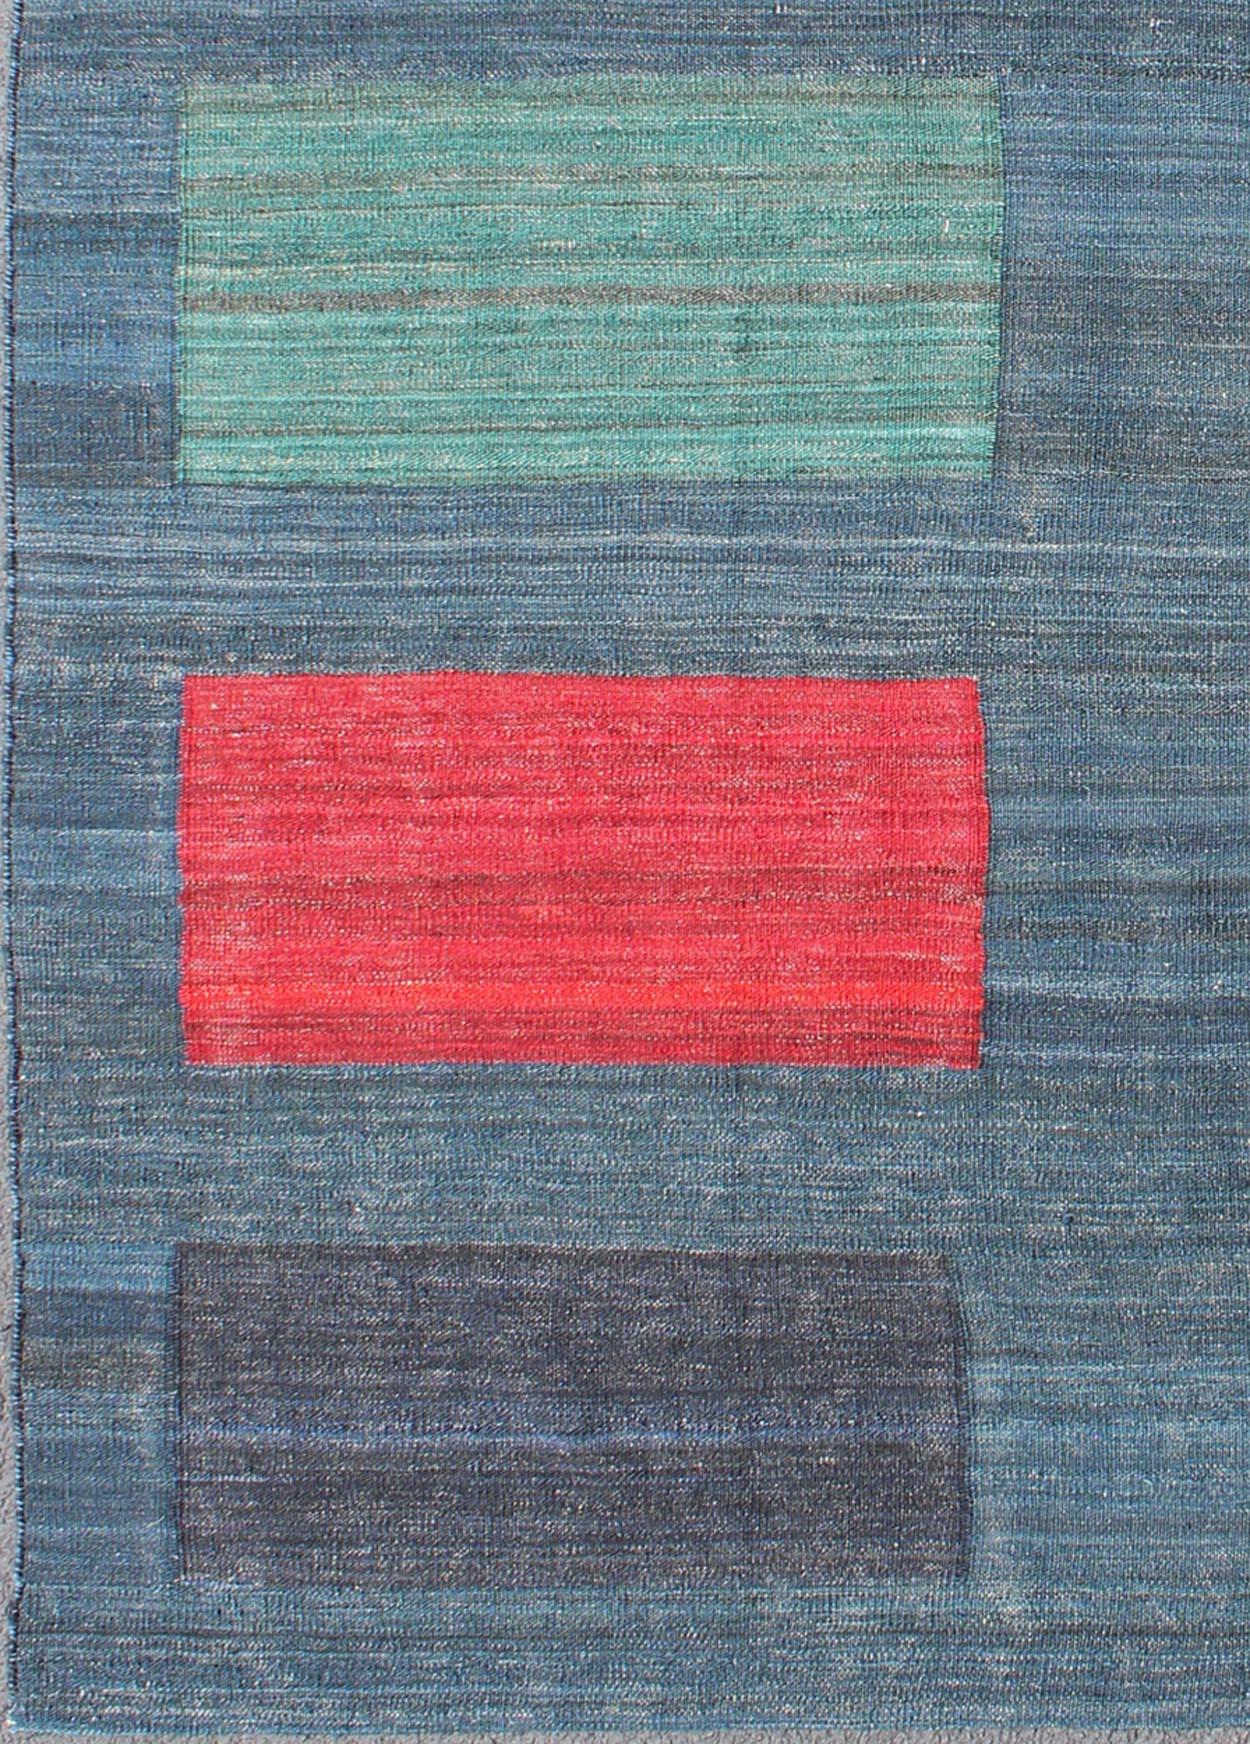 This flat-weave Kilim bears a repeating box design. Set on a gray and steal blue background, accent colors include green, maroon, red, charcoal, dark blue, cream, and pinkish color. This rug would be beautiful in a modern interior.
Measures: 6' x